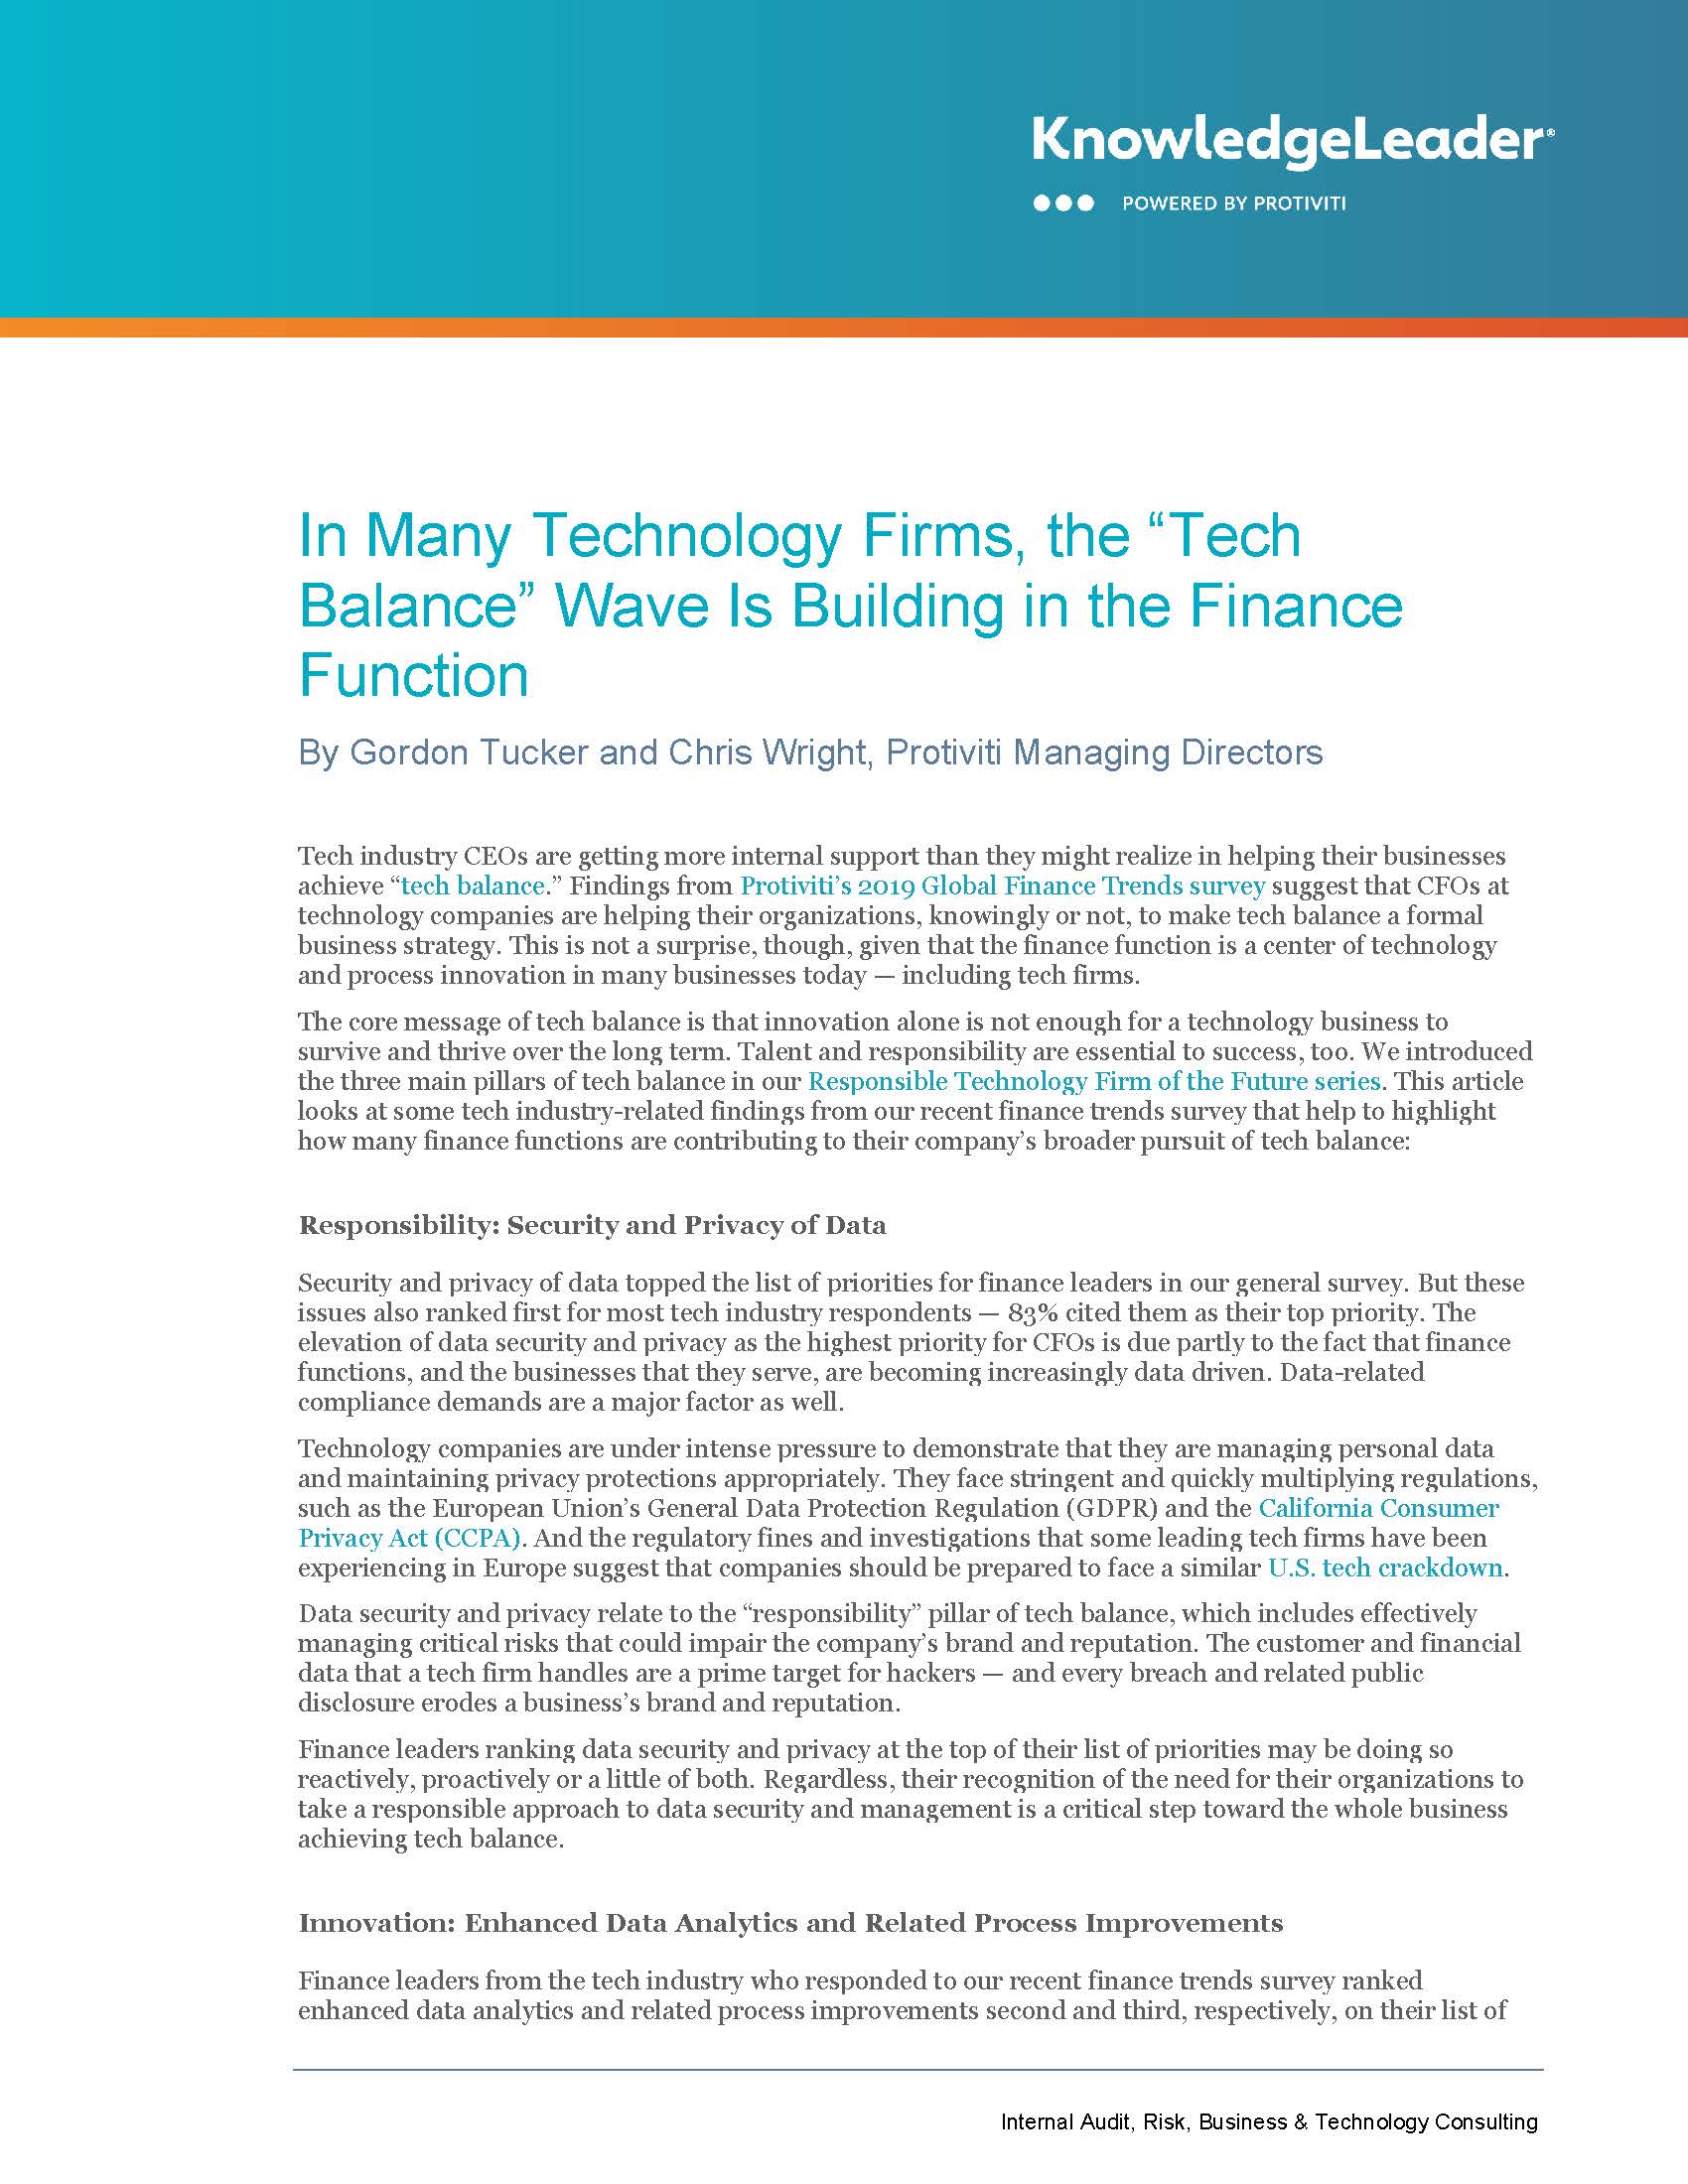 Screenshot of the first page of In Many Technology Firms, the “Tech Balance” Wave Is Building in the Finance Function